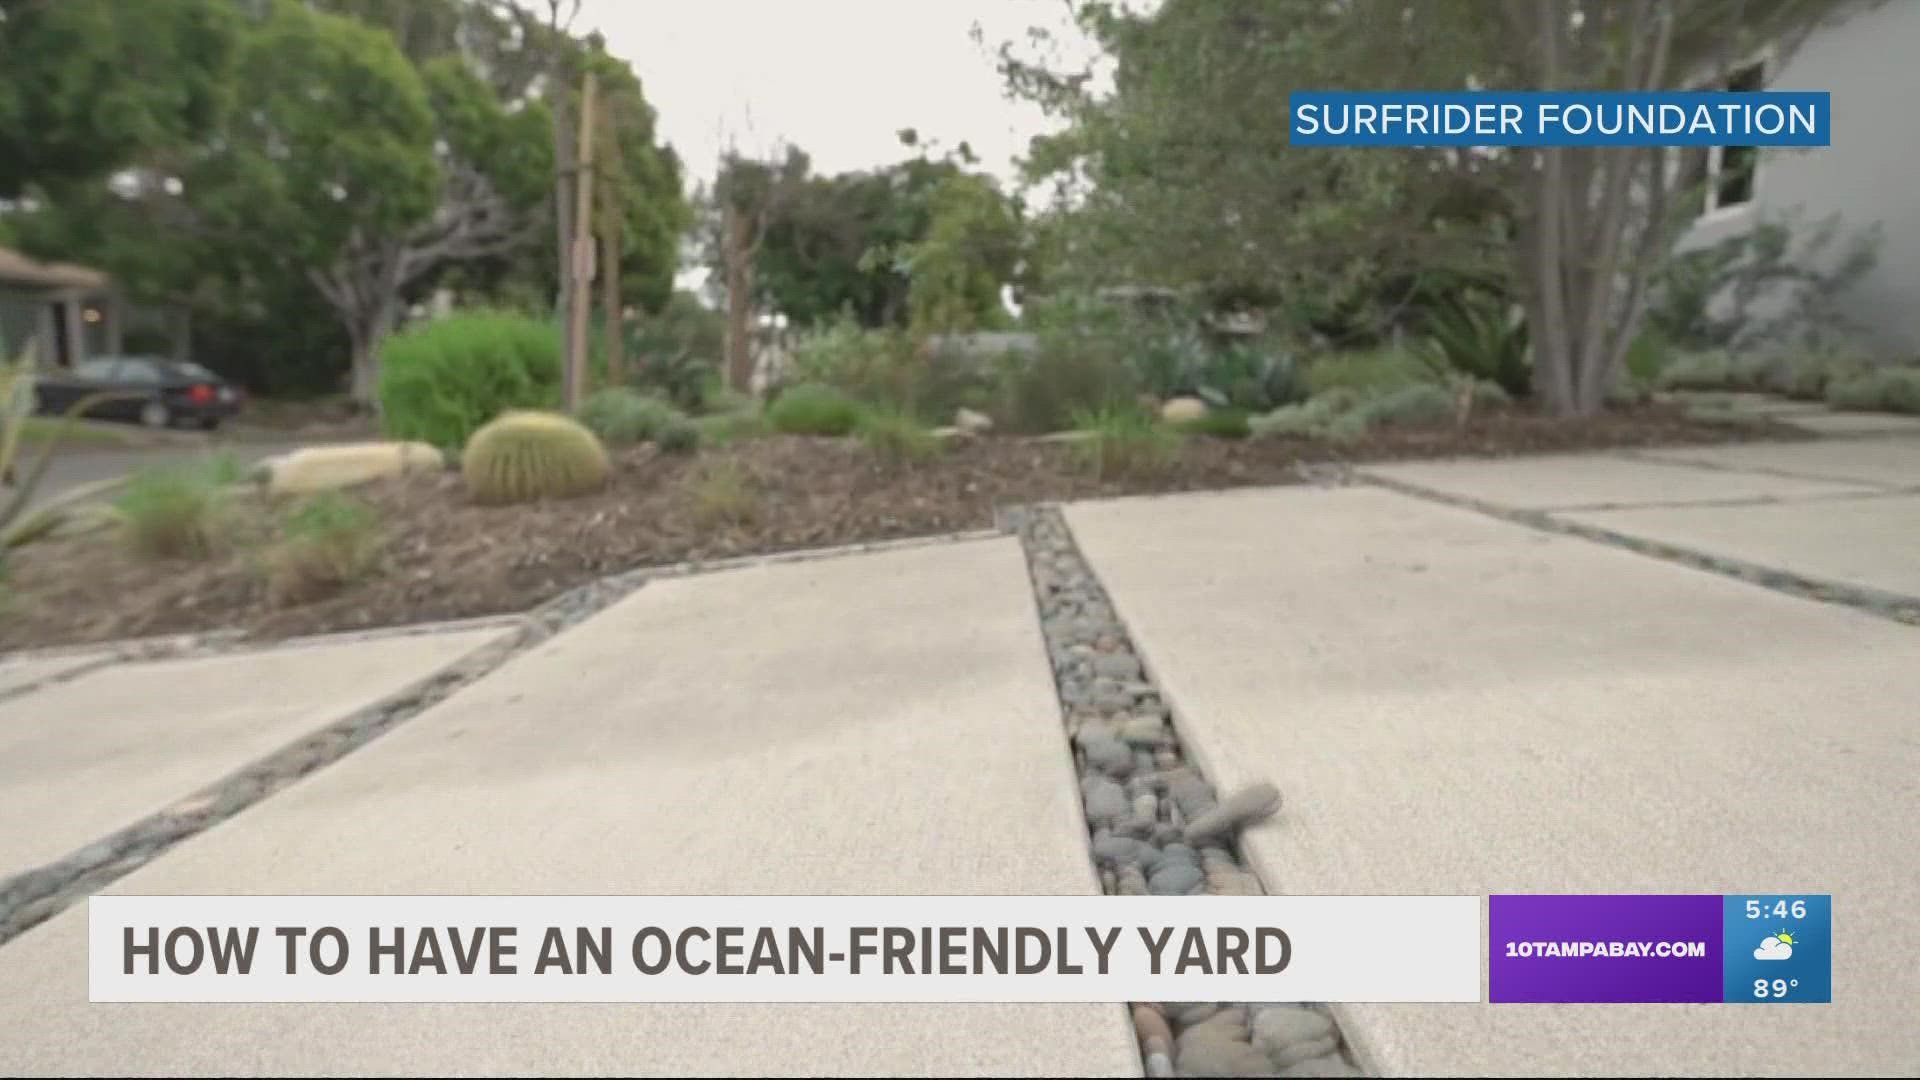 Advocates for ocean-friendly landscaping at the Surfrider Foundation say it’s all one big ecosystem.